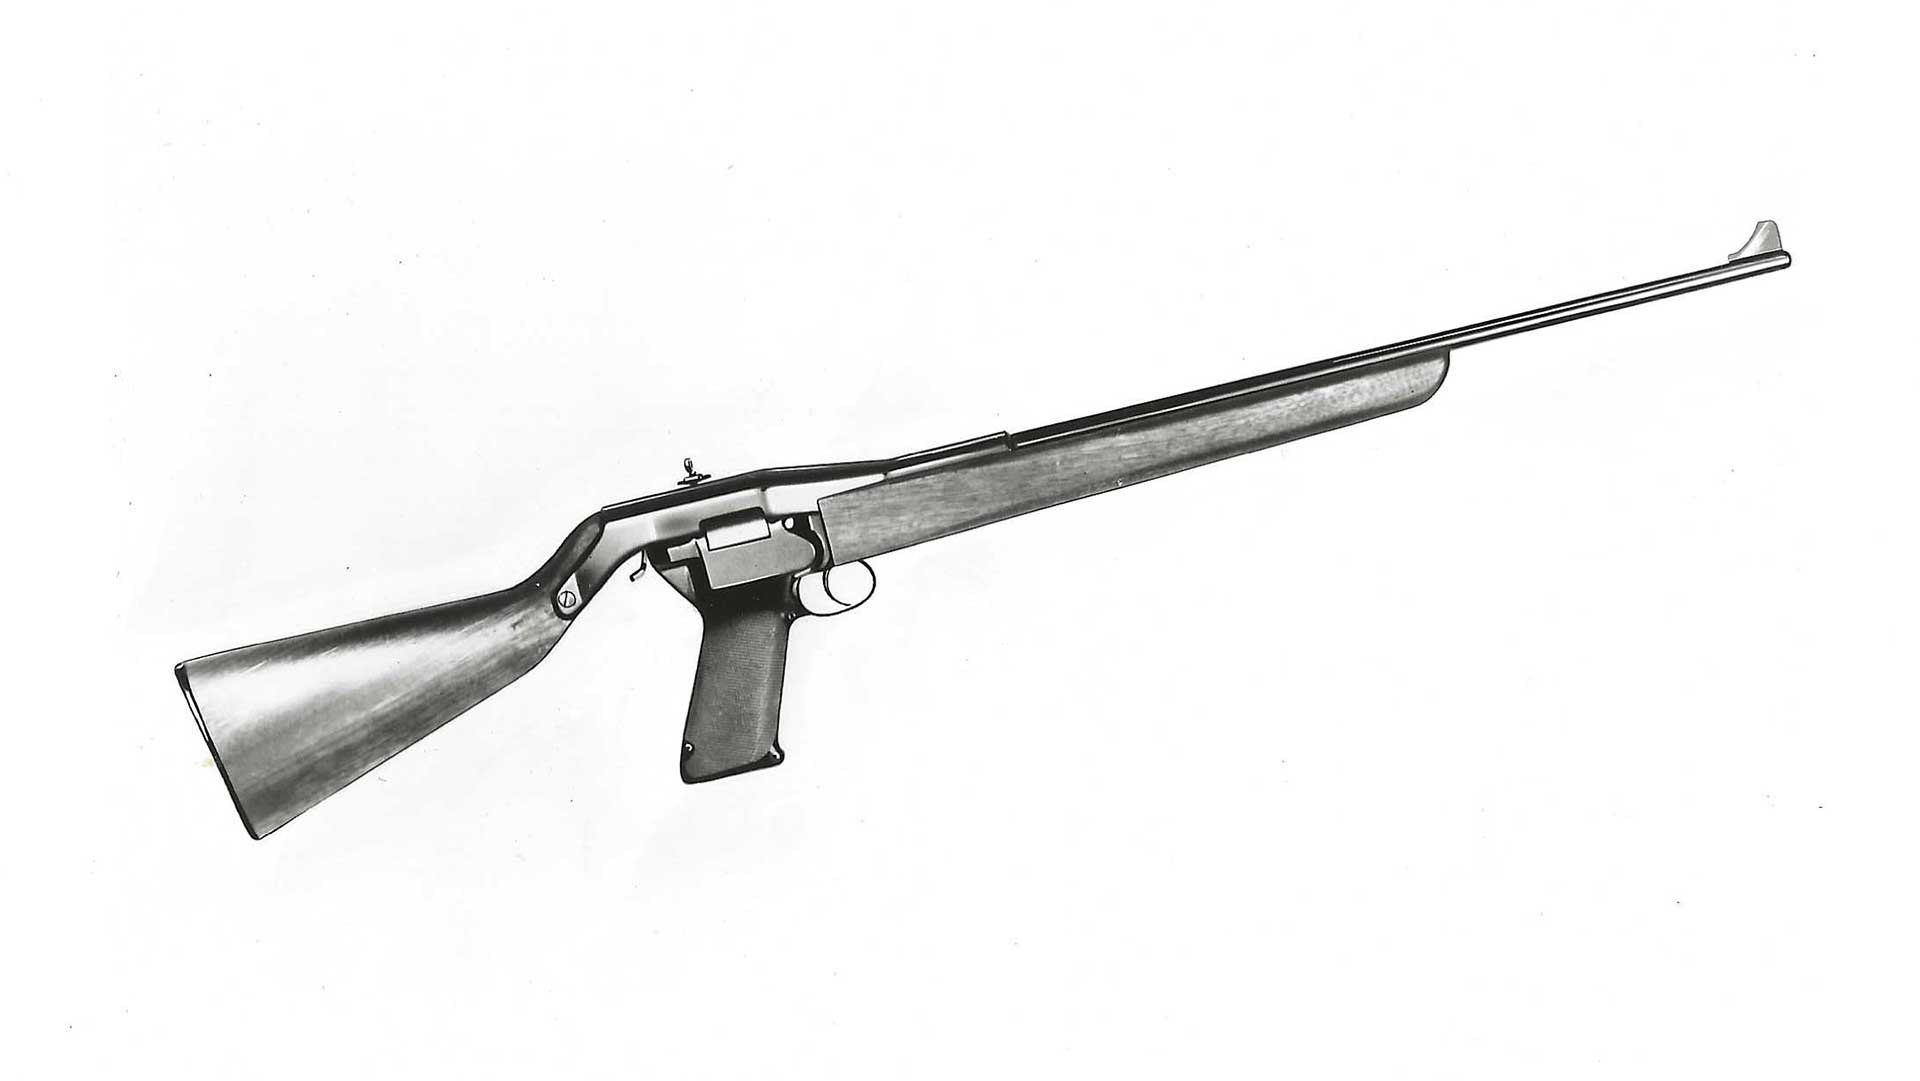 The Dardick pistol shown converted into a lightweight carbine.